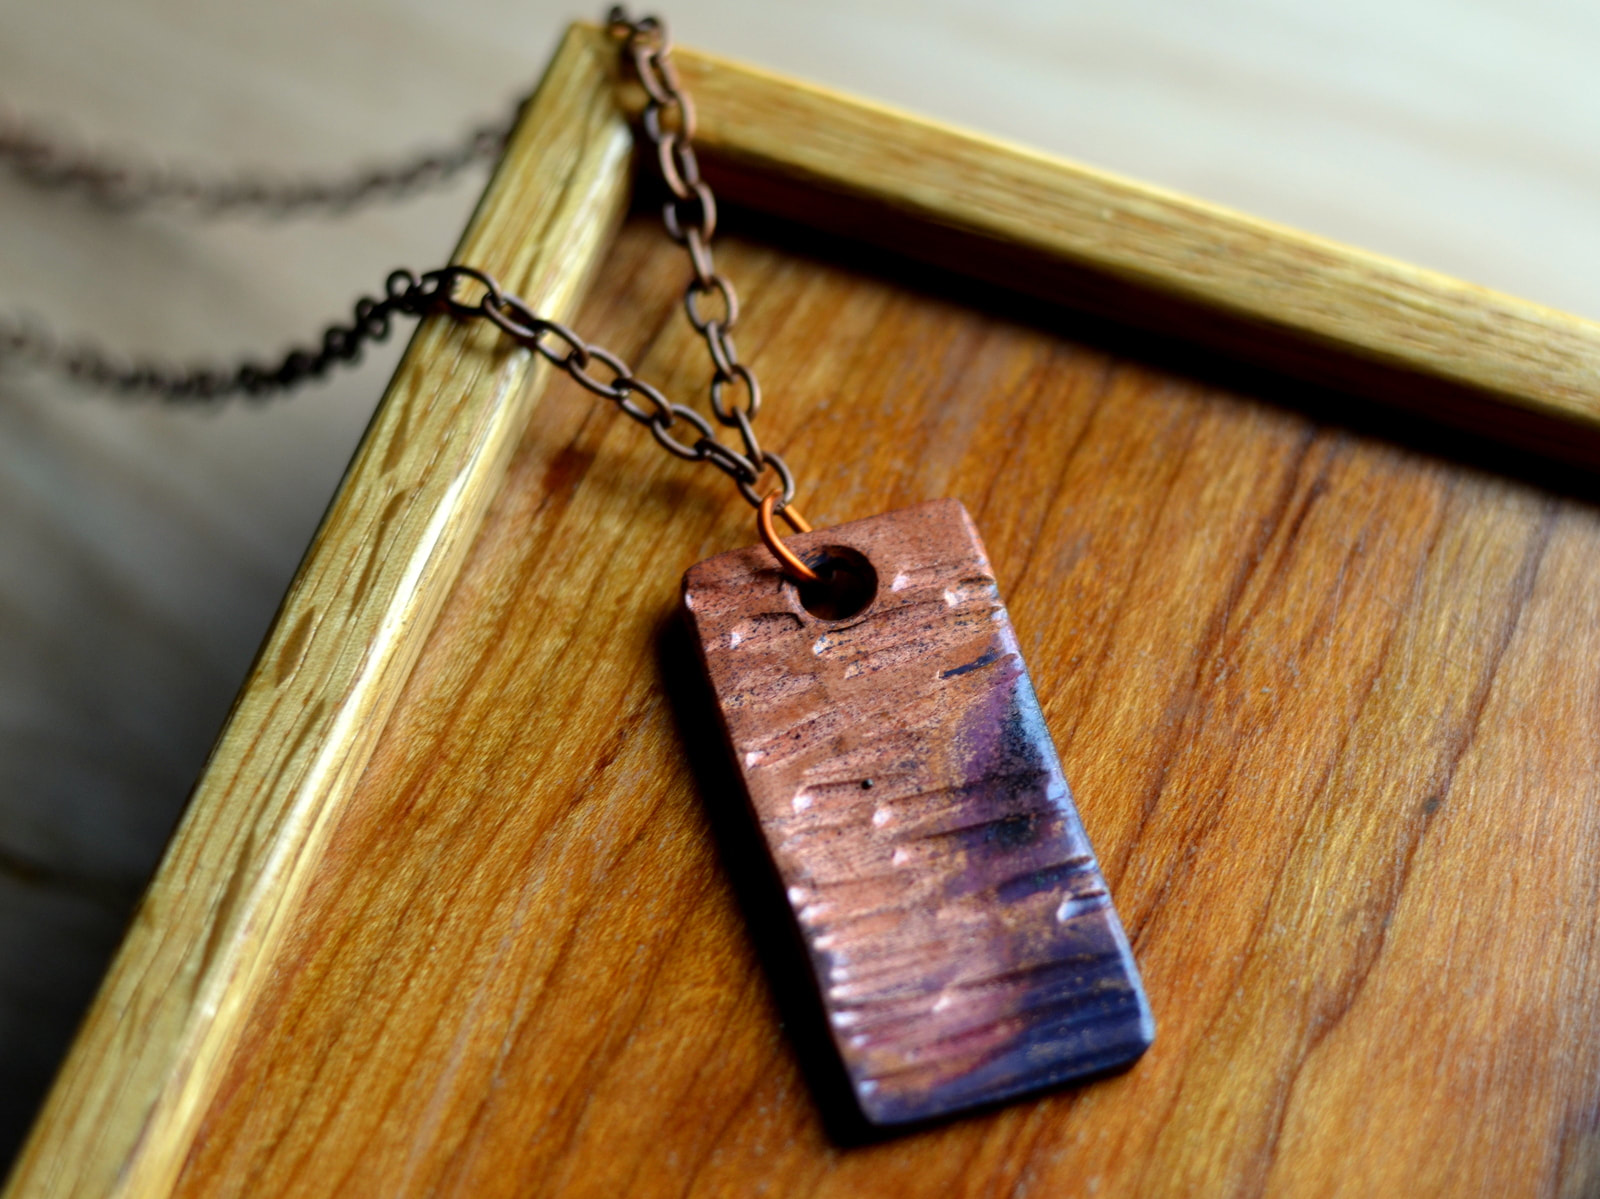 Hammered Copper Pendant and Necklace in Pebble Textured Styling with Sheen